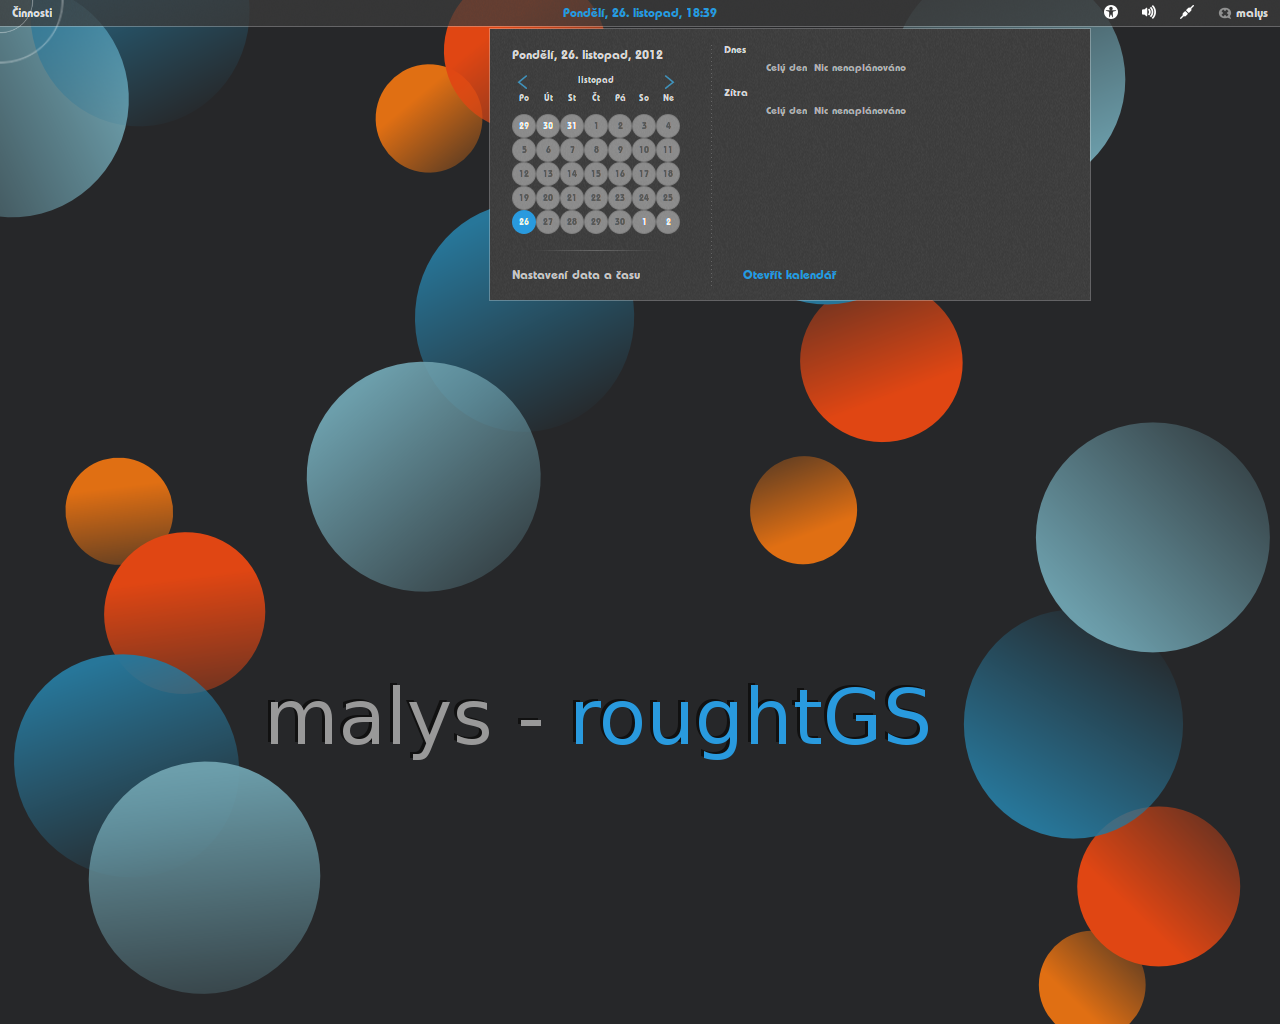 malys - roughtGS